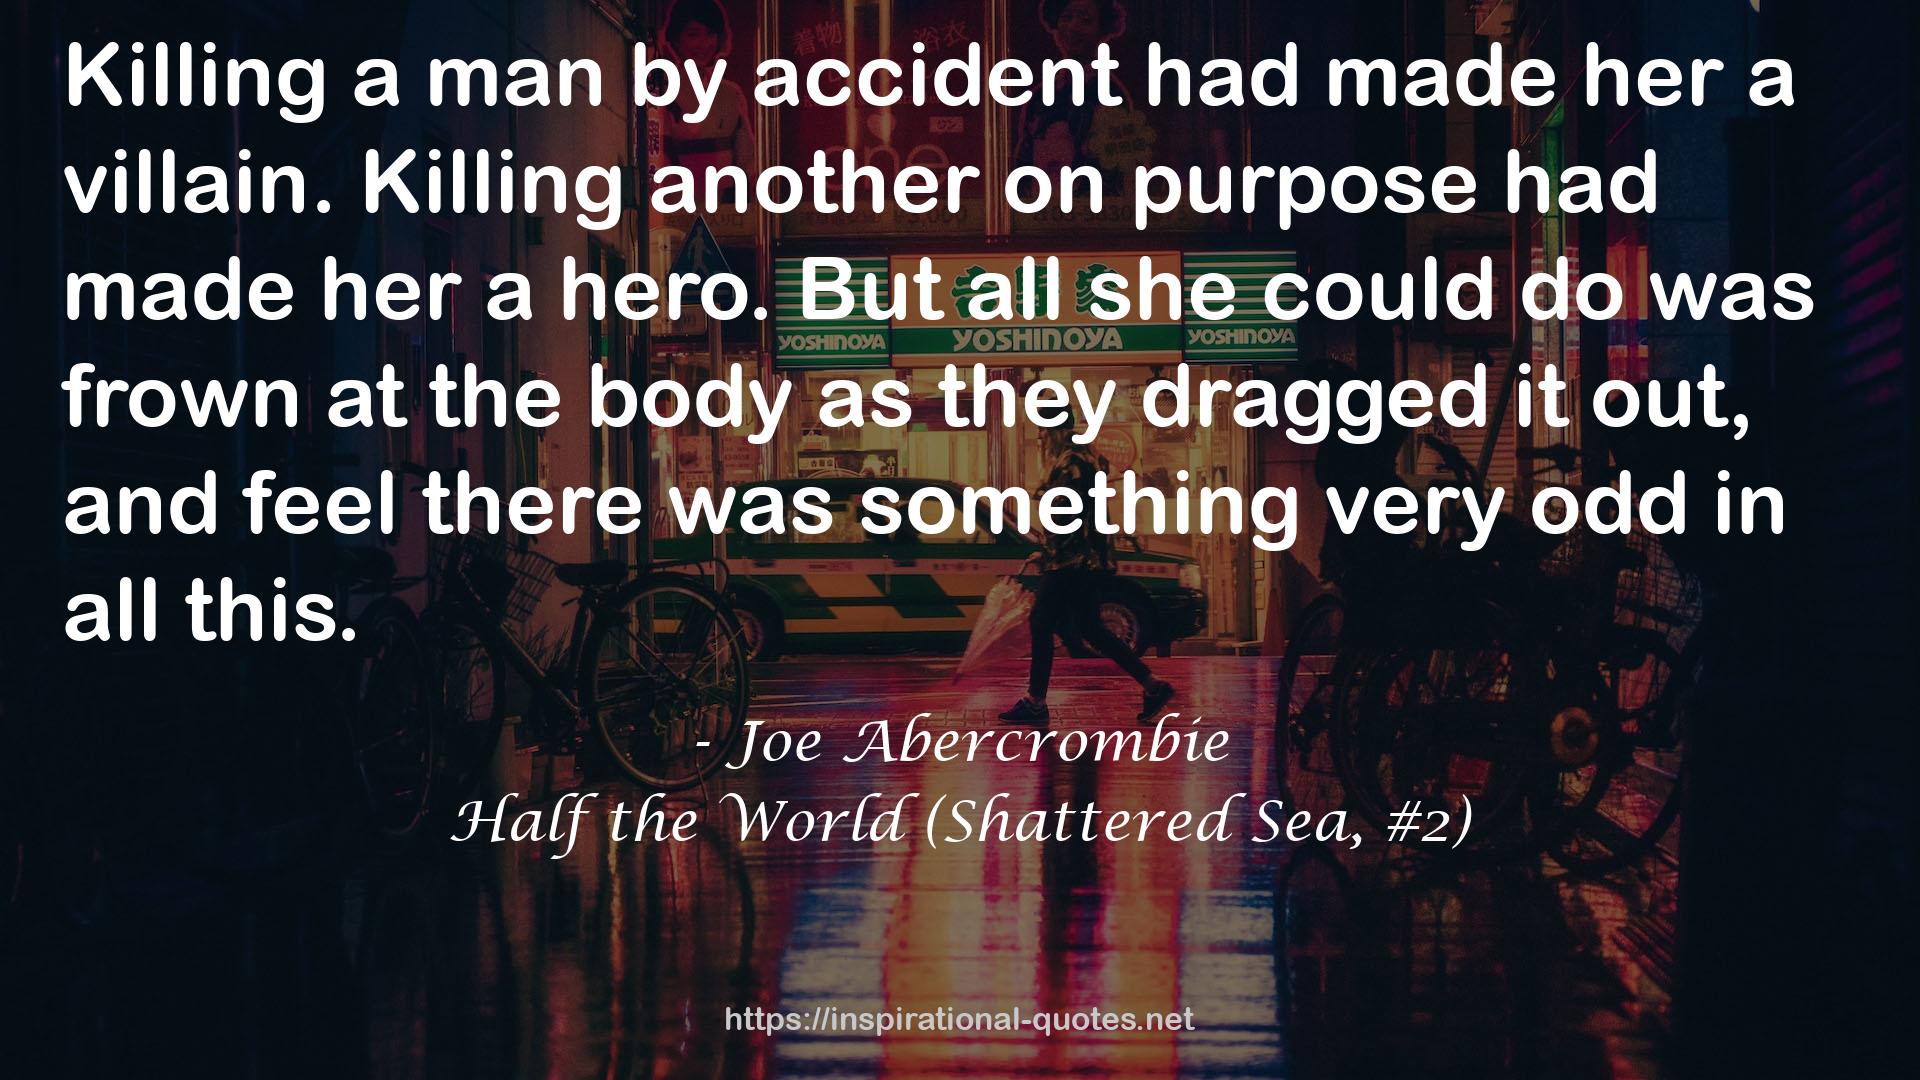 Half the World (Shattered Sea, #2) QUOTES